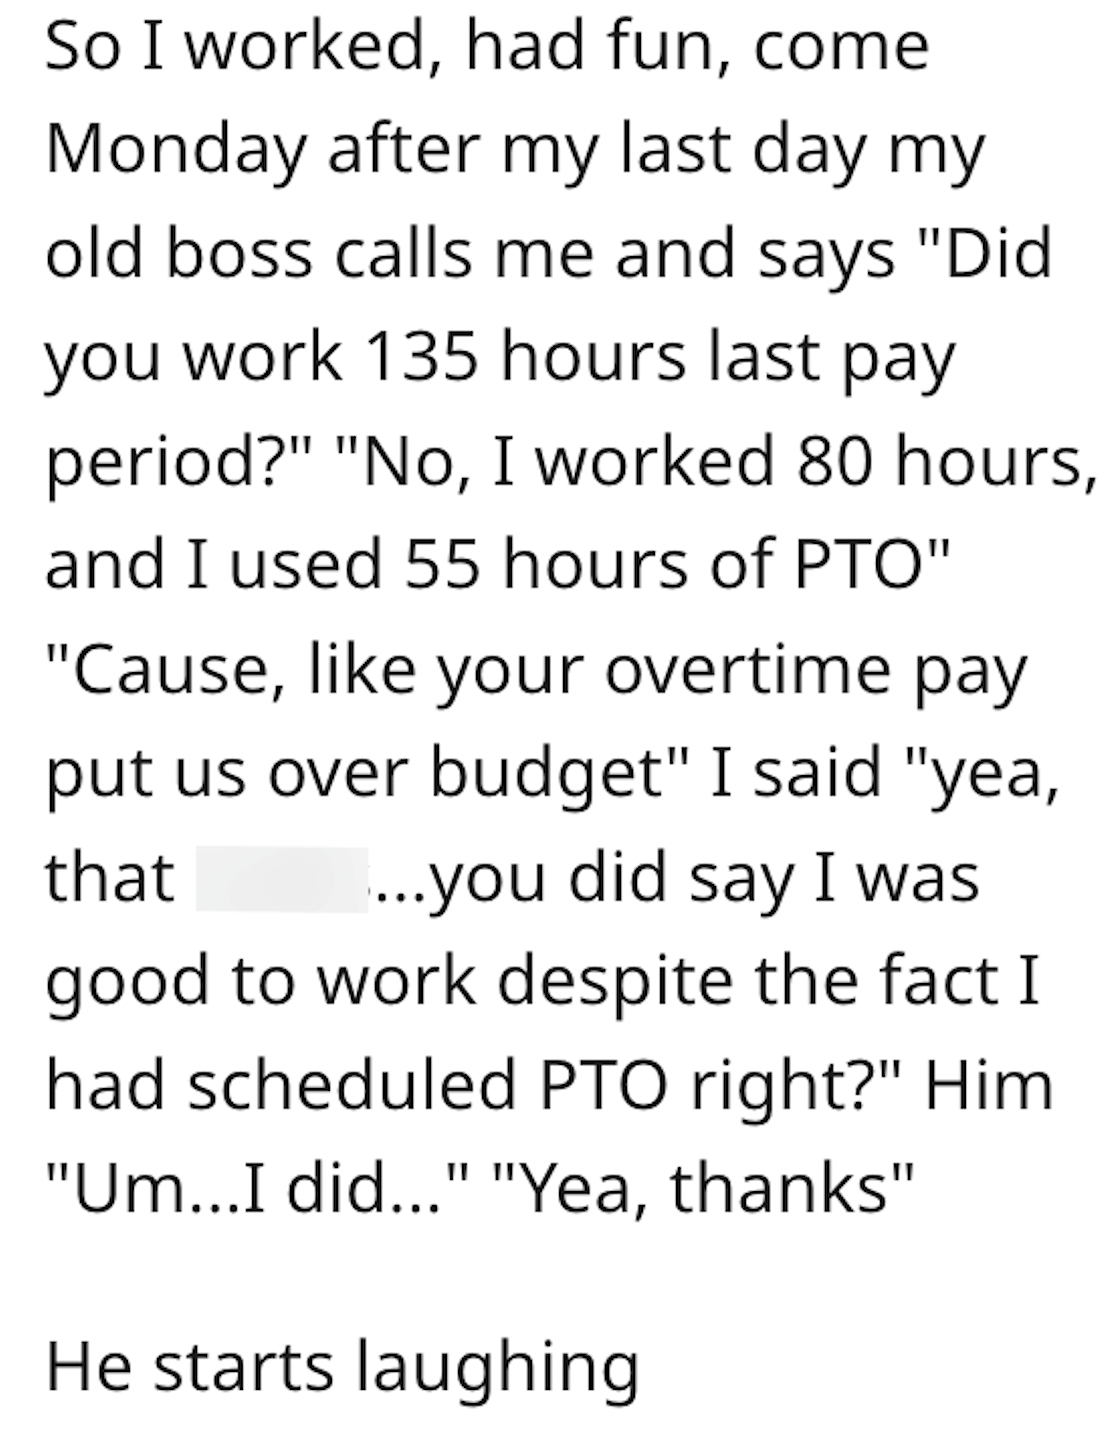 handwriting - So I worked, had fun, come Monday after my last day my old boss calls me and says "Did you work 135 hours last pay period?" "No, I worked 80 hours, and I used 55 hours of Pto" "Cause, your overtime pay put us over budget" I said "yea, that .